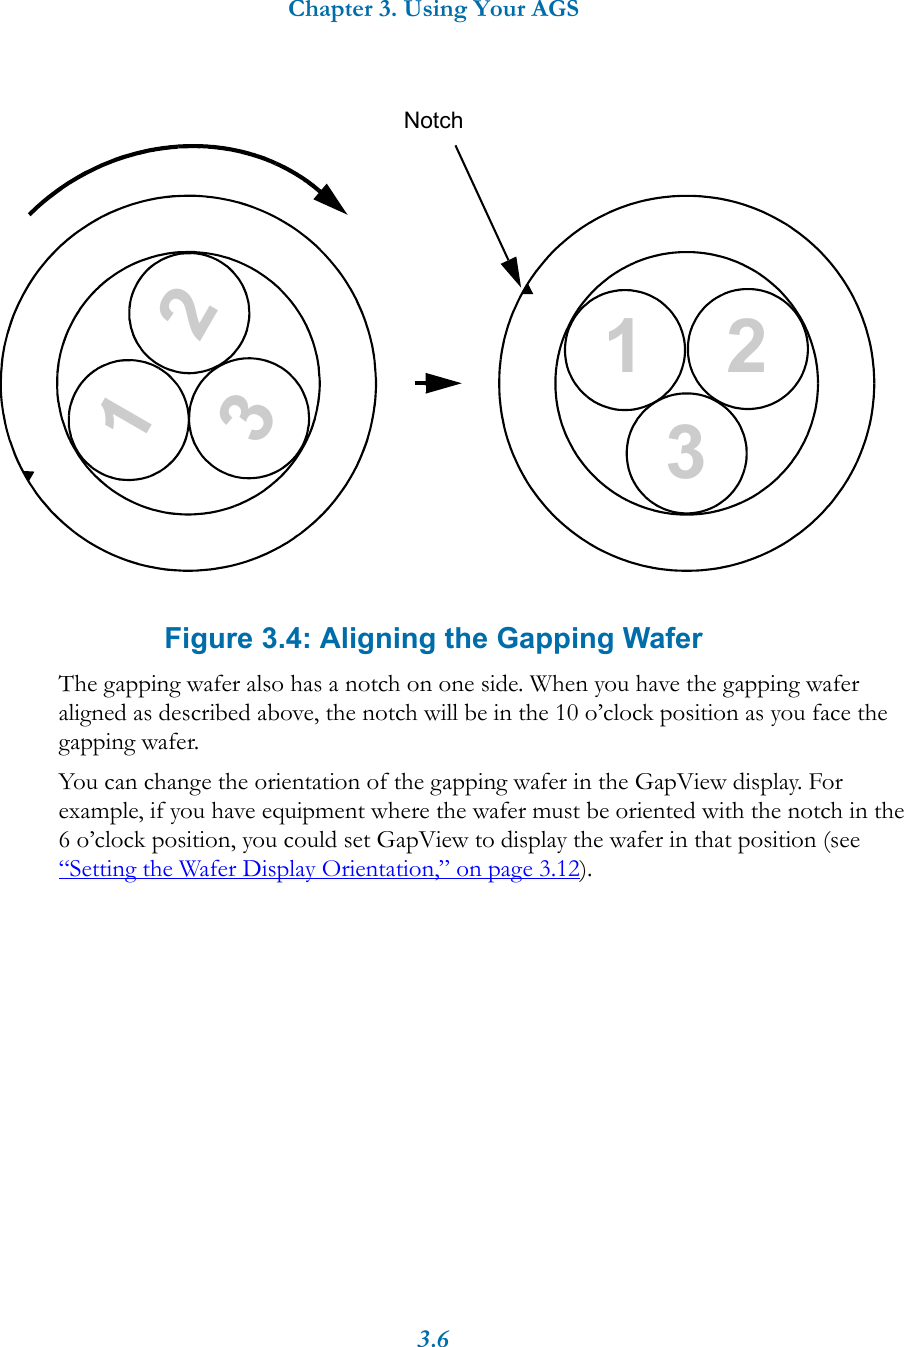 Chapter 3. Using Your AGS3.6Figure 3.4: Aligning the Gapping WaferThe gapping wafer also has a notch on one side. When you have the gapping wafer aligned as described above, the notch will be in the 10 o’clock position as you face the gapping wafer.You can change the orientation of the gapping wafer in the GapView display. For example, if you have equipment where the wafer must be oriented with the notch in the 6 o’clock position, you could set GapView to display the wafer in that position (see “Setting the Wafer Display Orientation,” on page 3.12). Notch231231